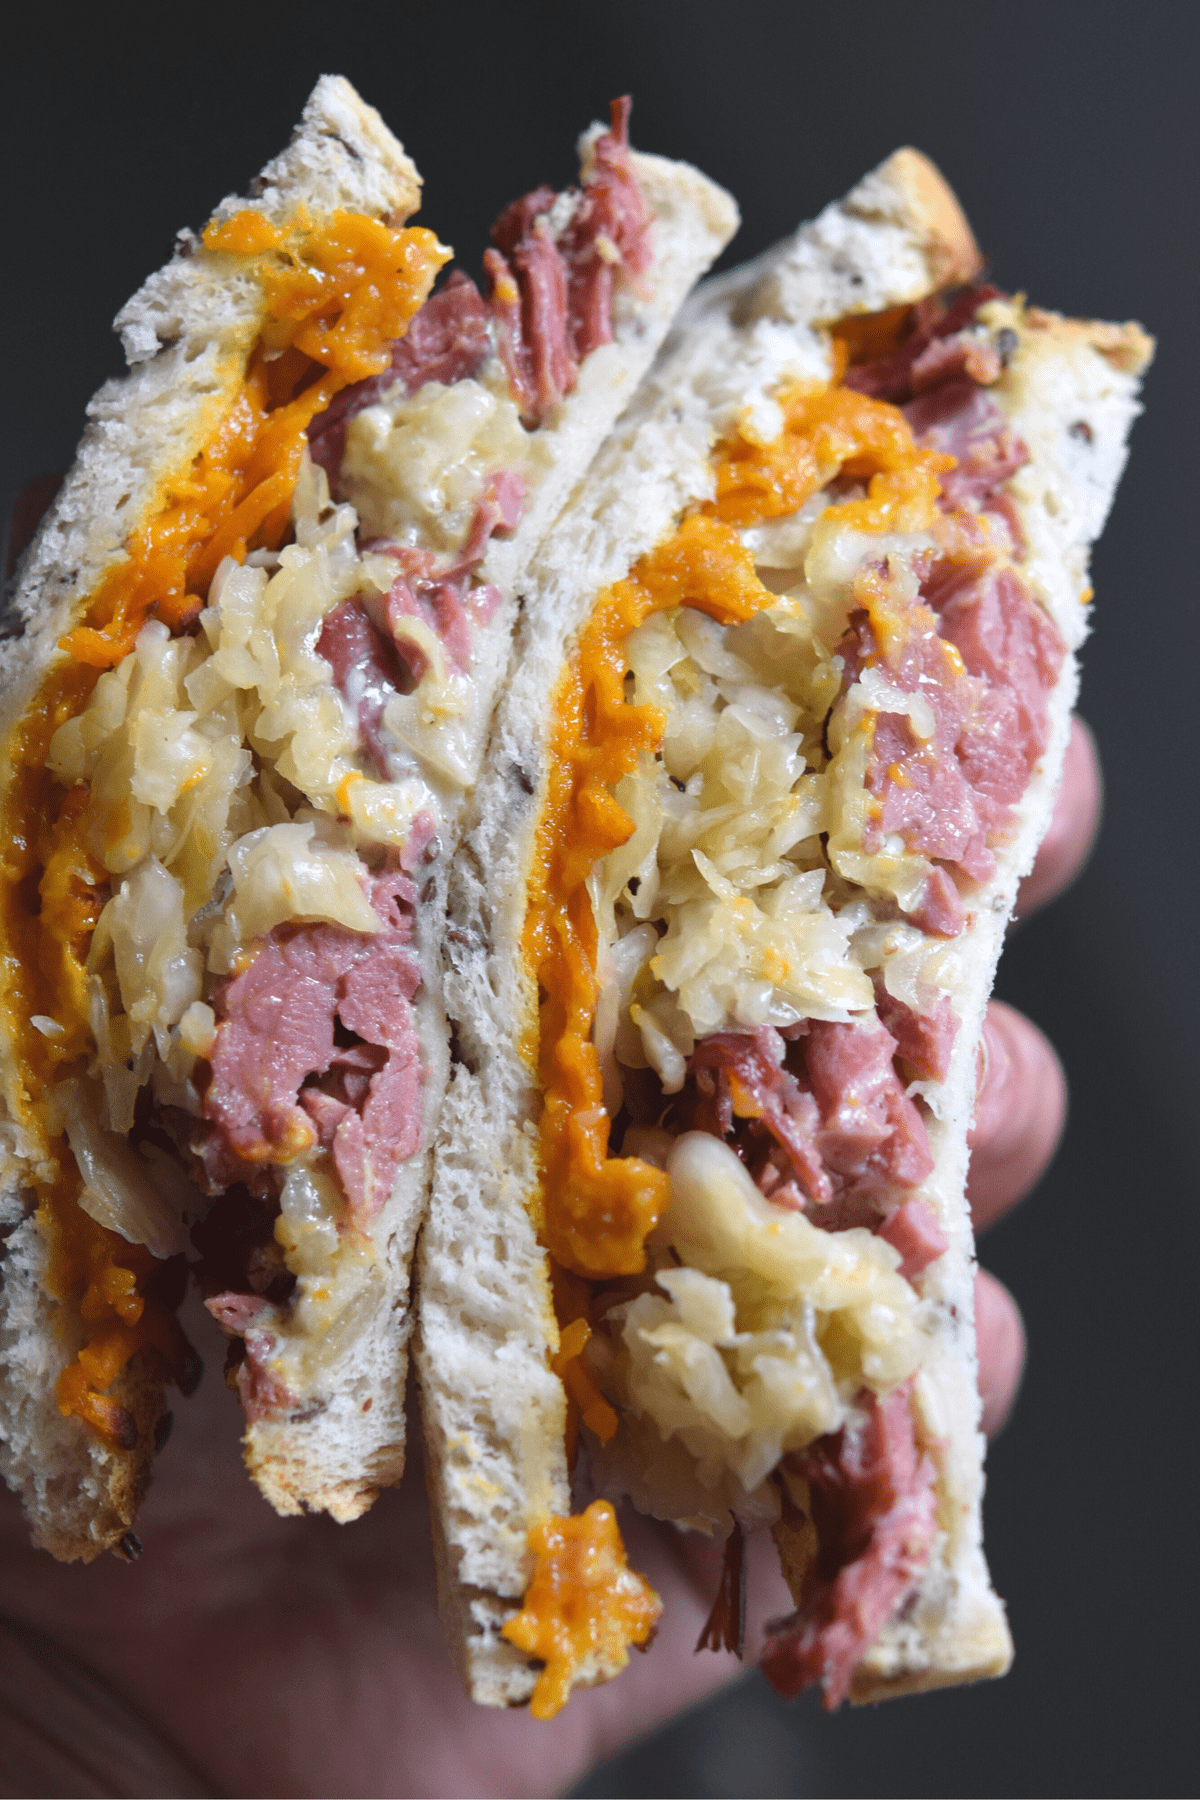 keto reuben sandwich stacked and held in hand, you see the melted cheese, sauerkraut and meat on toasted bread